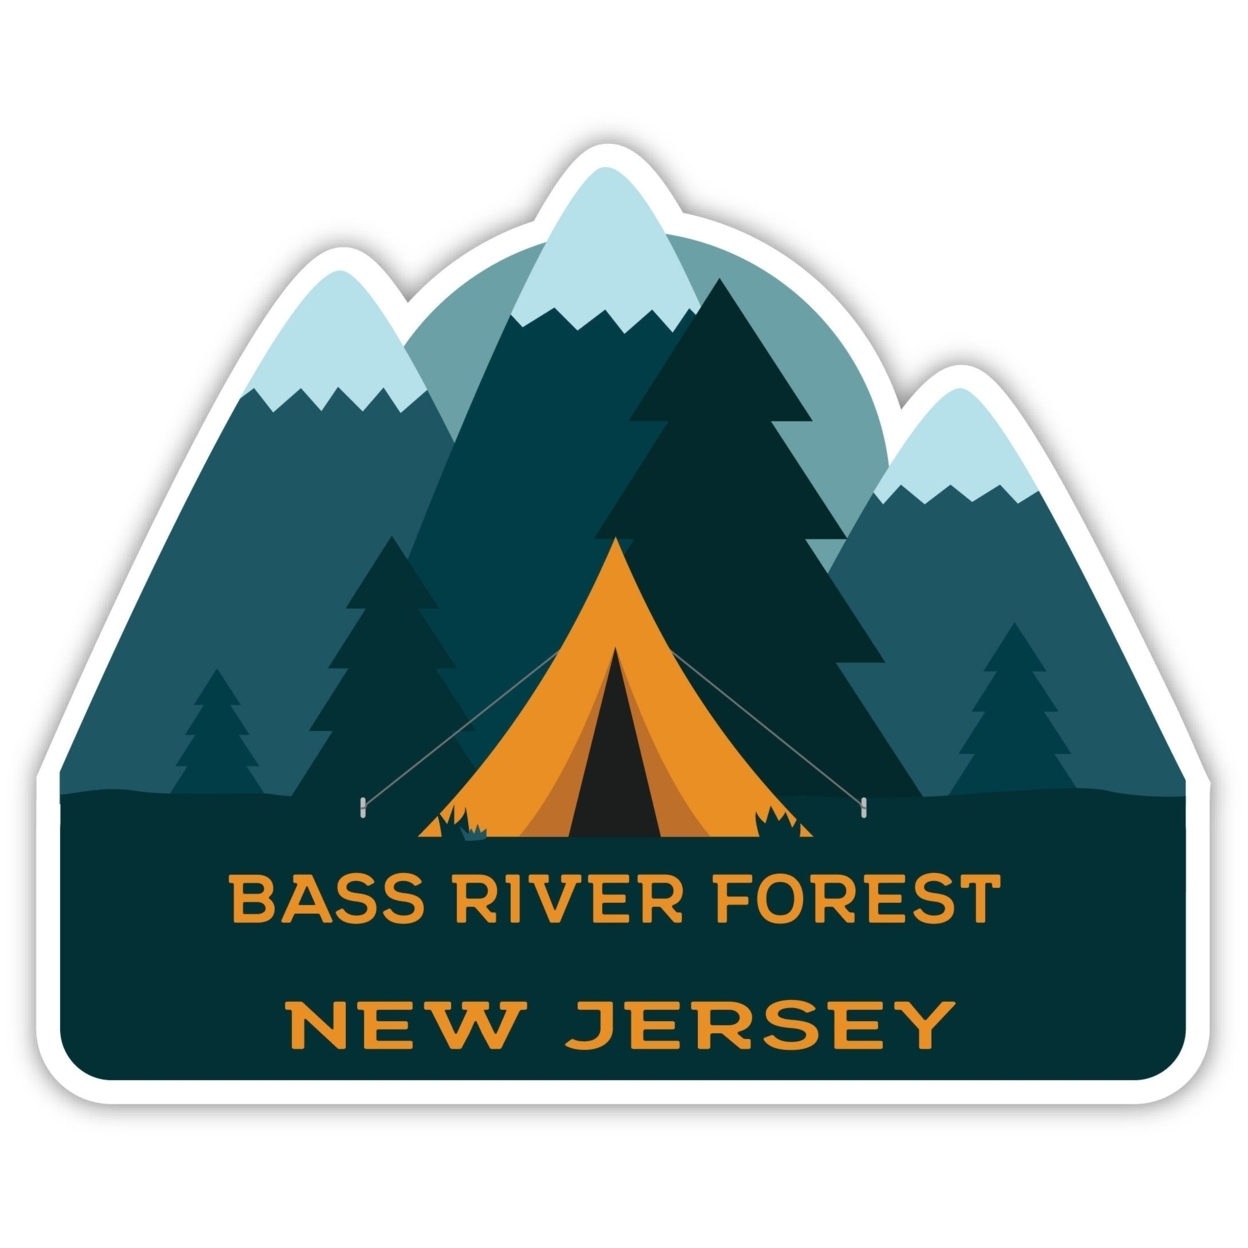 Bass River Forest New Jersey Souvenir Decorative Stickers (Choose Theme And Size) - 4-Pack, 6-Inch, Tent